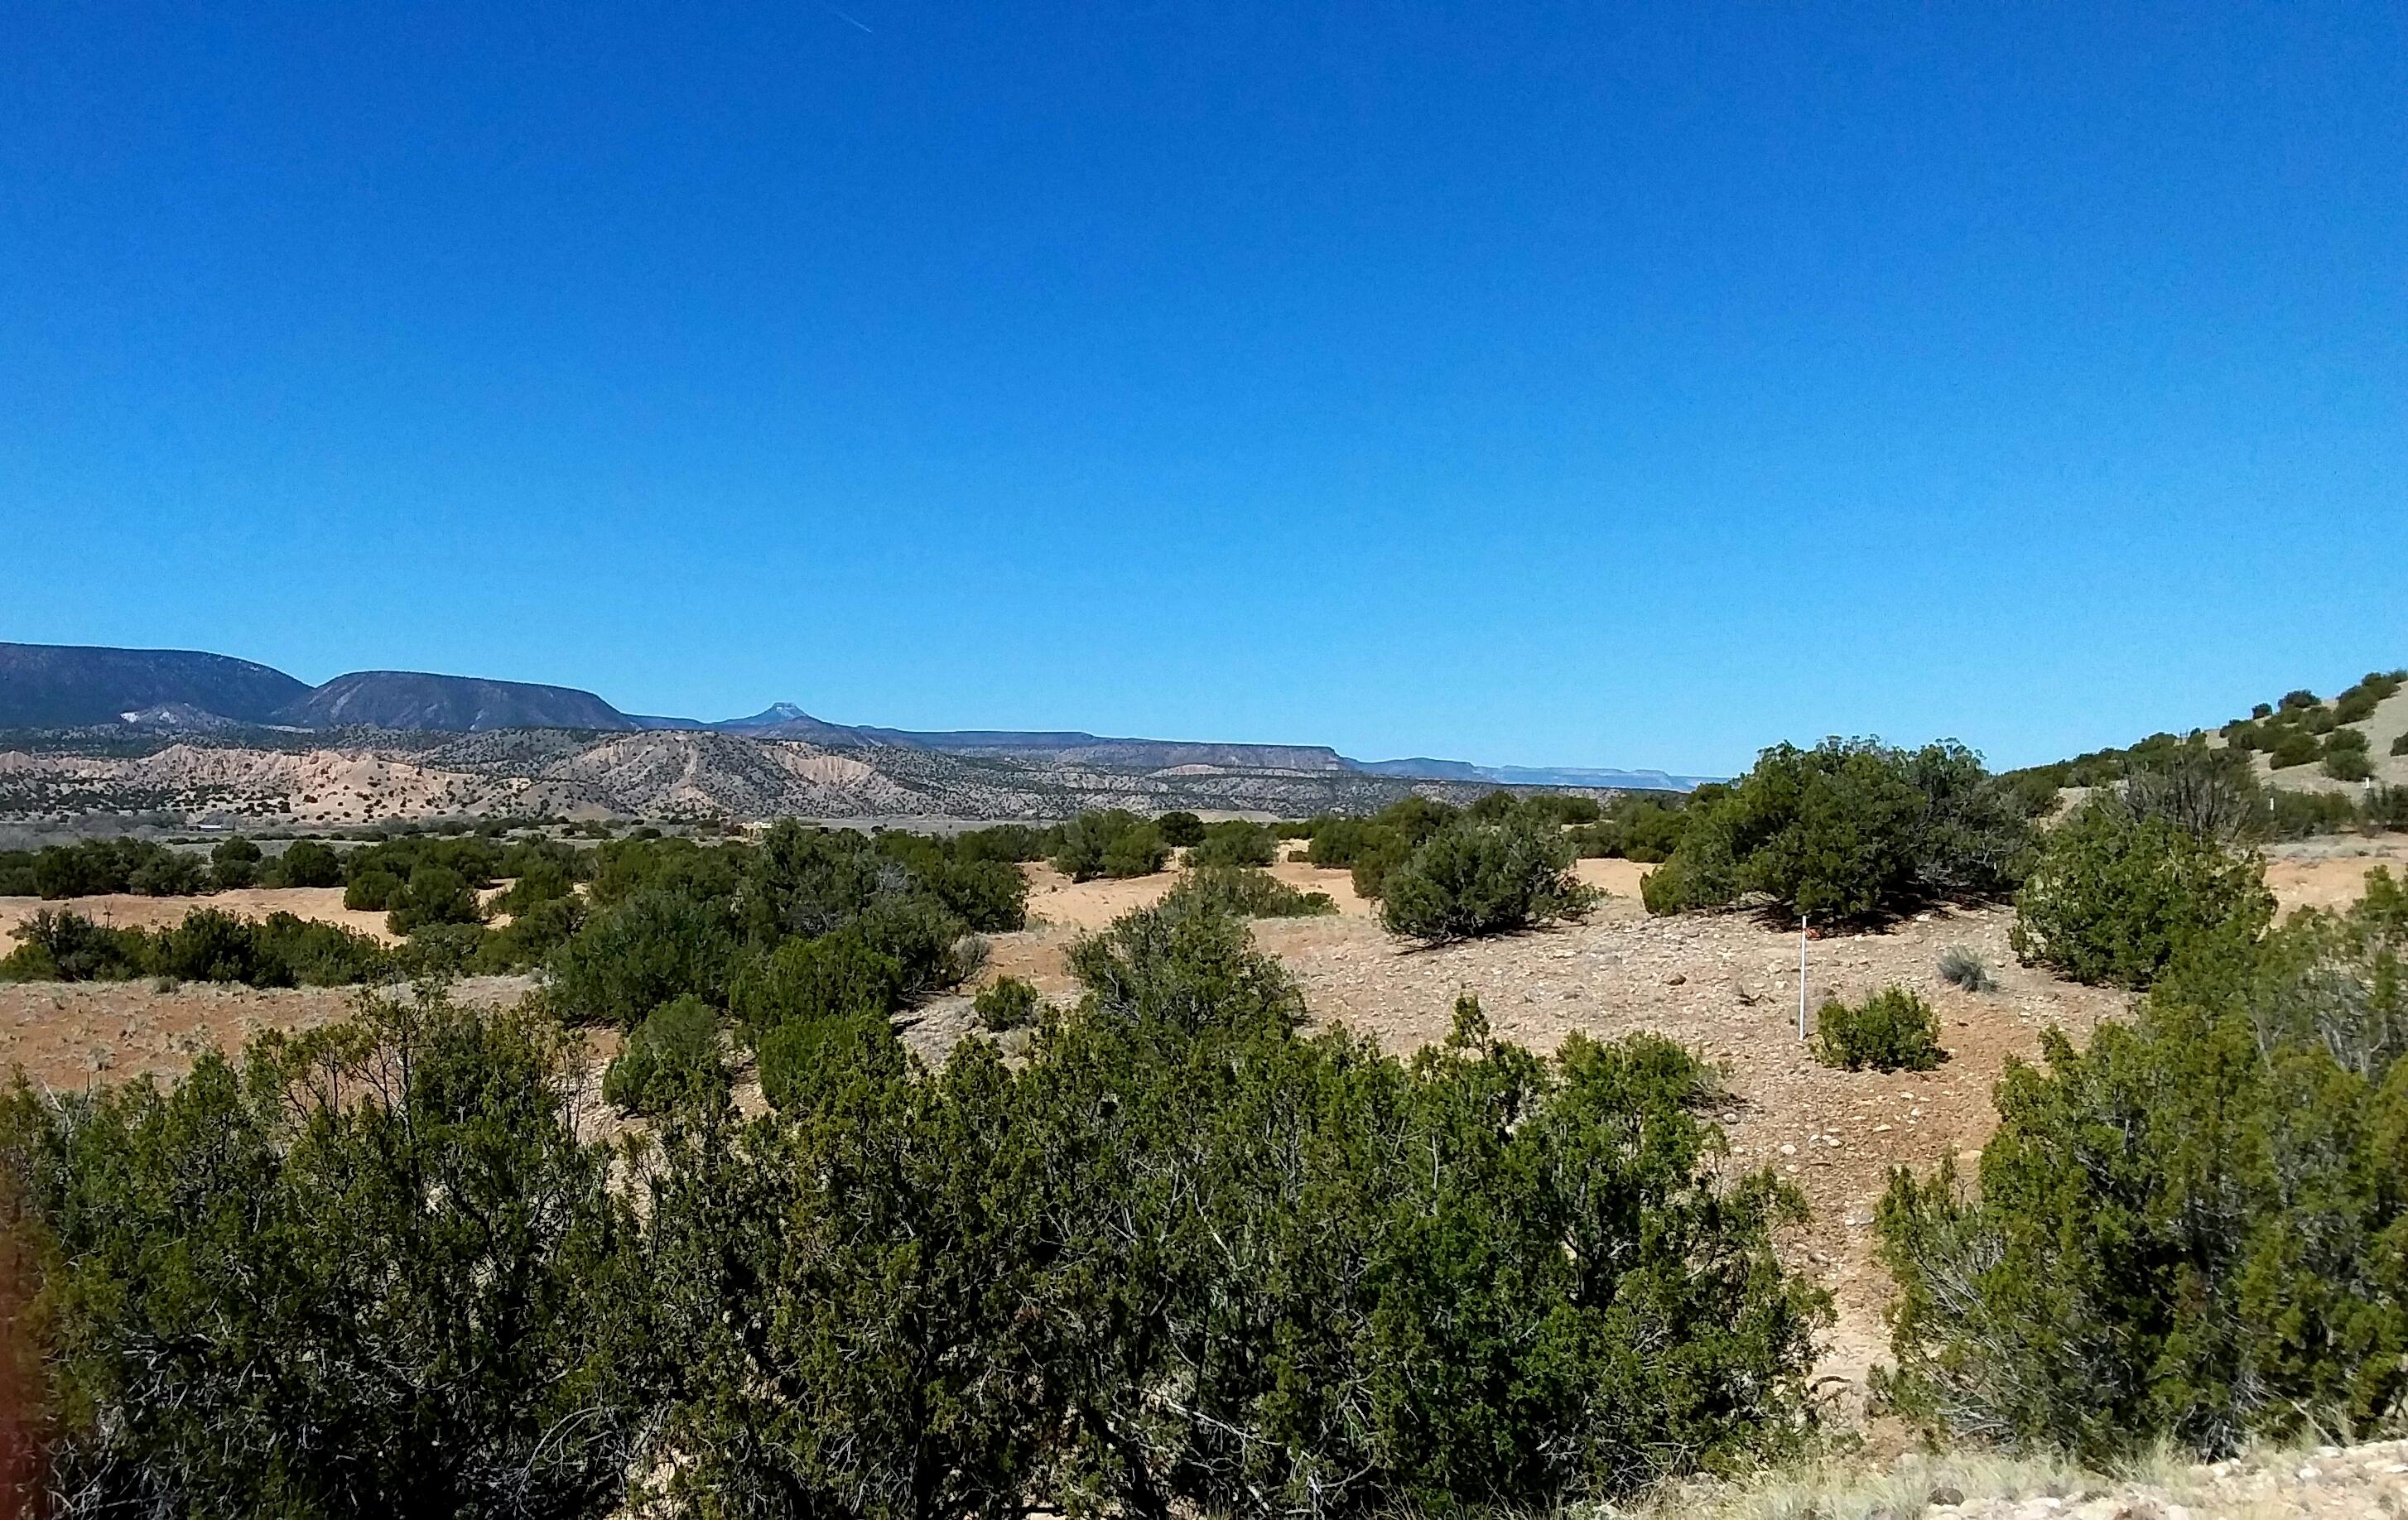 691 County Rd 142, Abiquiu, New Mexico 87510, ,Farm,For Sale,691 County Rd 142,1060703